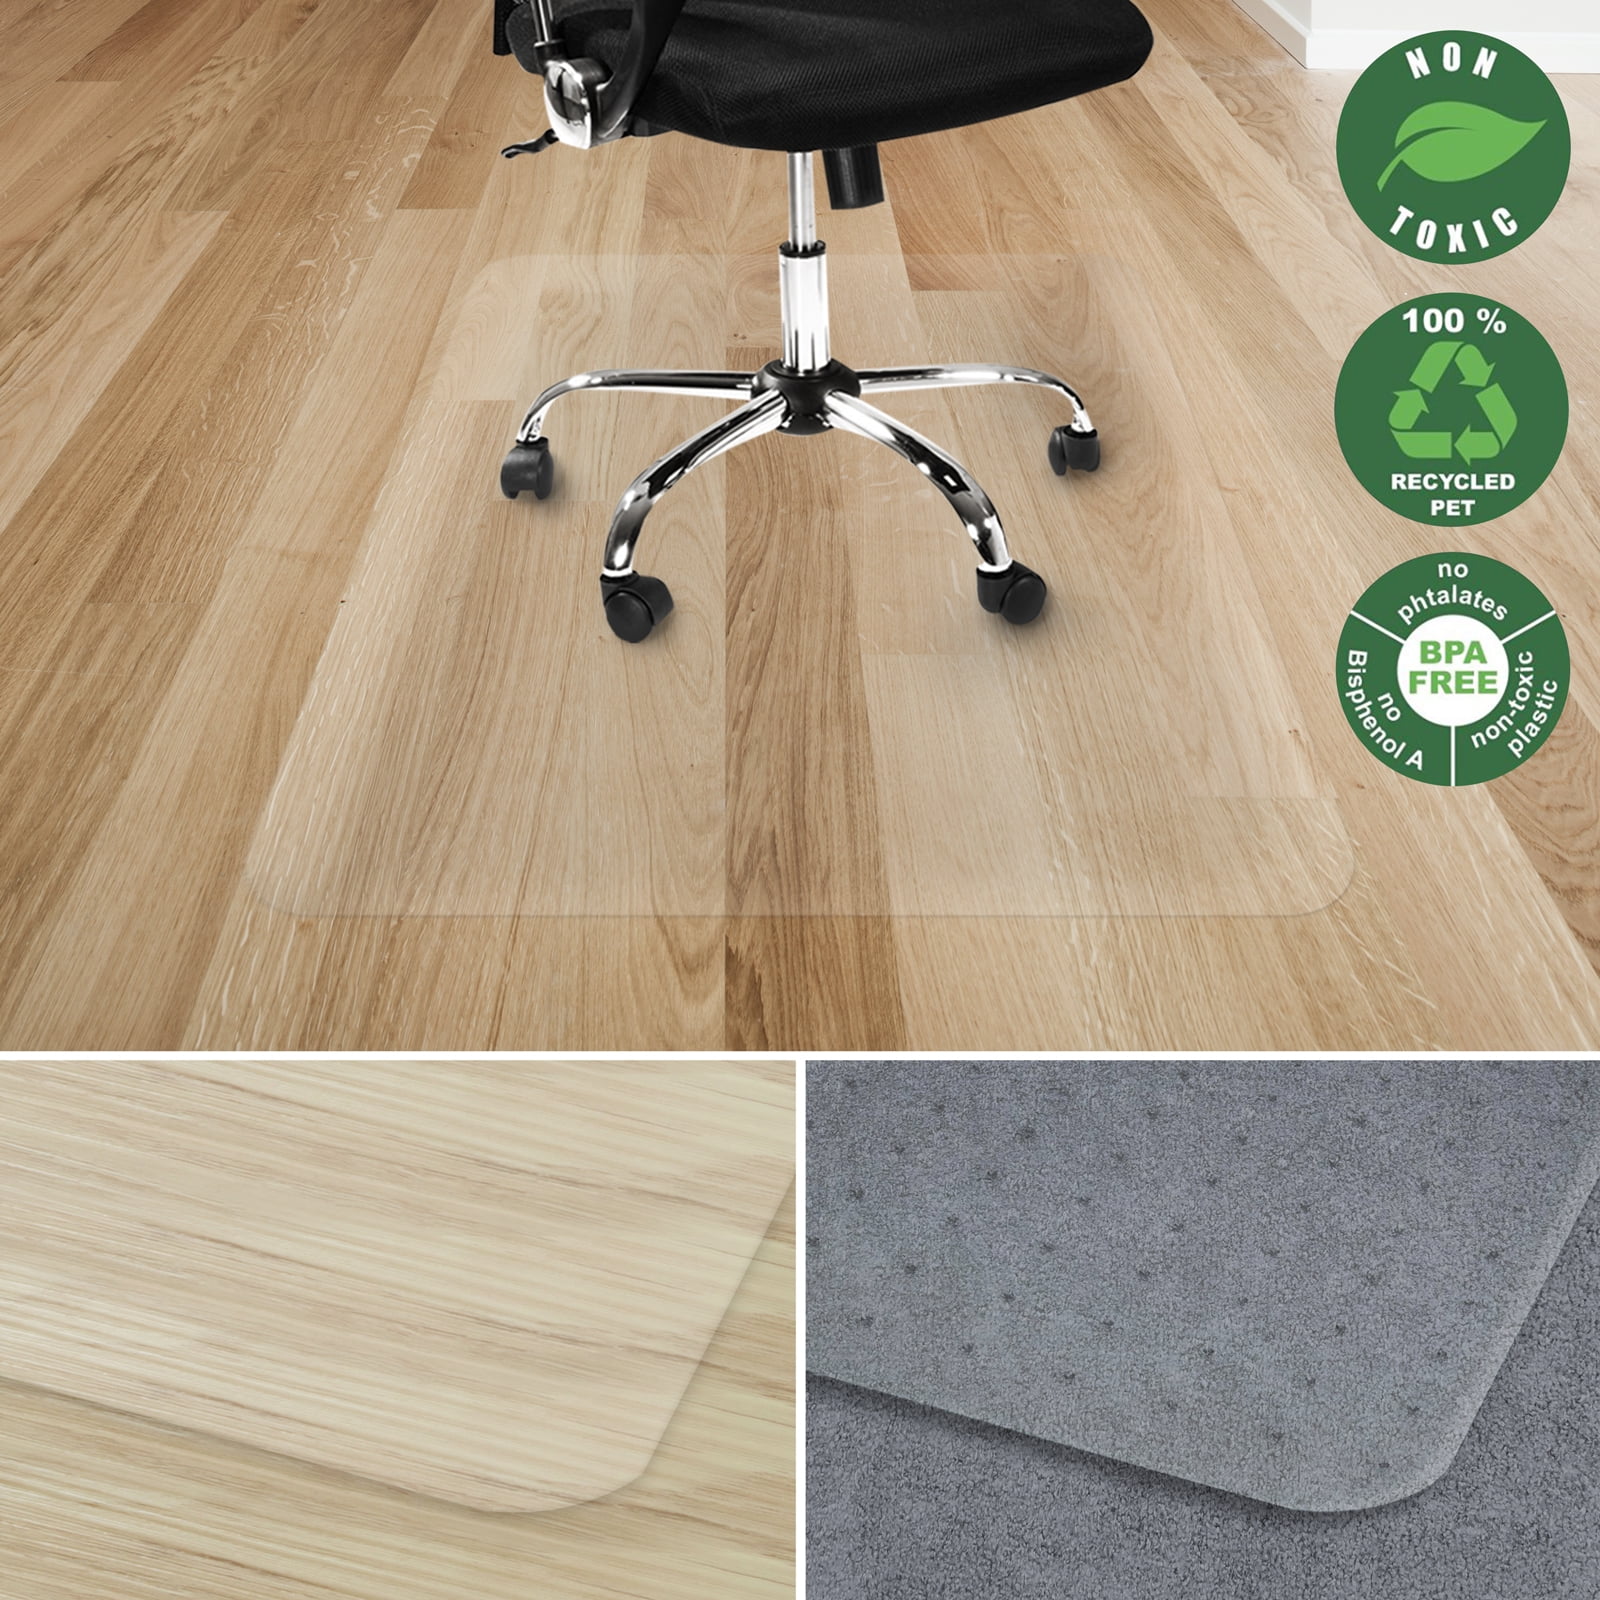 Rolling Chairs -Desk Mat/&Office Mat for Hardwood Floor-Sturdy/&Durable Polycarbonate Office Chair Mat for Hardwood Floor Immediately Flat When Taken Out of Box: 30x48 Floor Mat for Office Chair